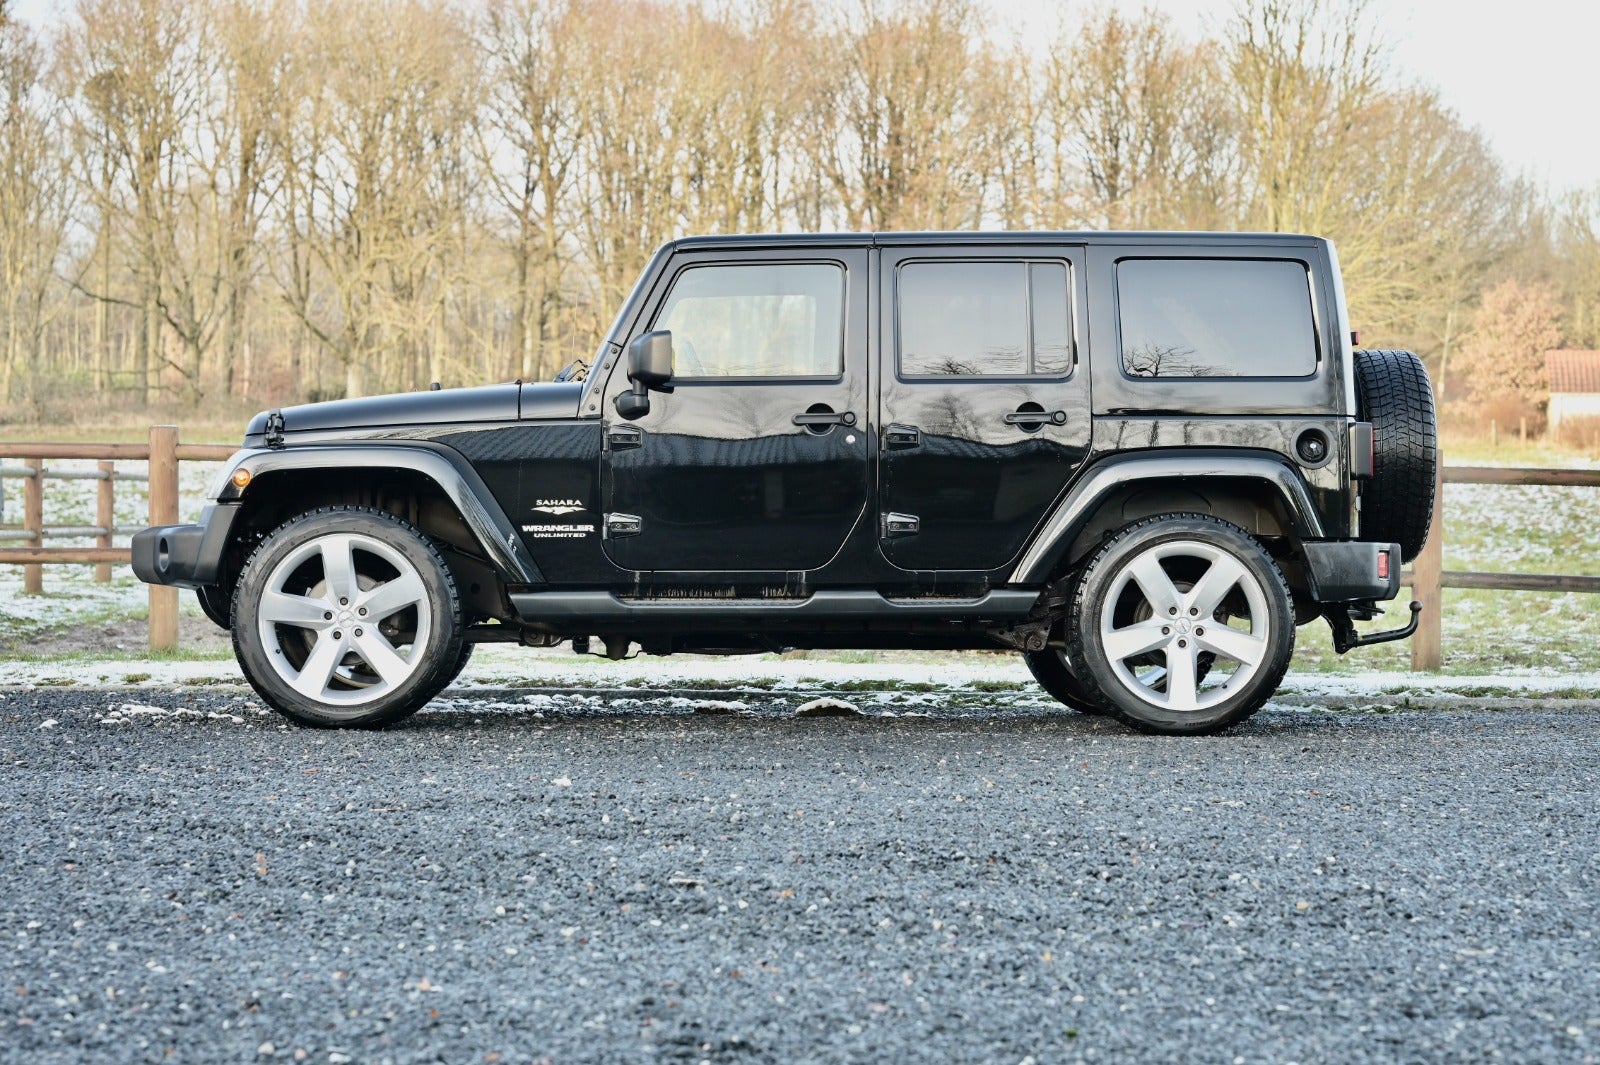 Jeep Wrangler Unlimited 2015